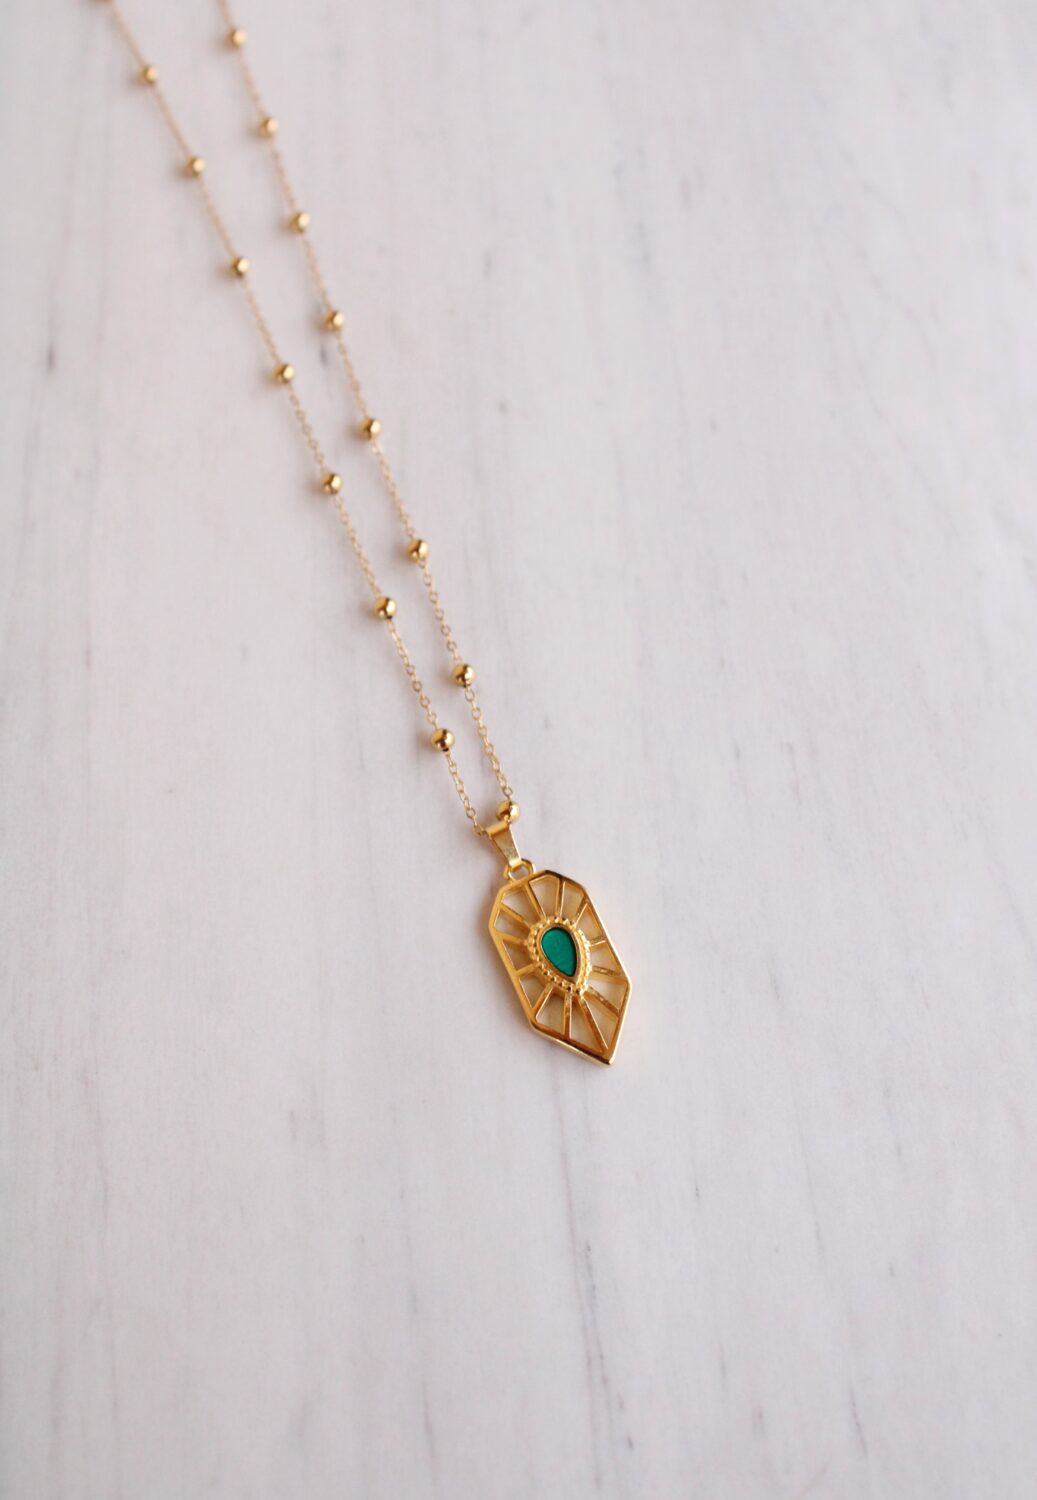 Green ethnic necklace